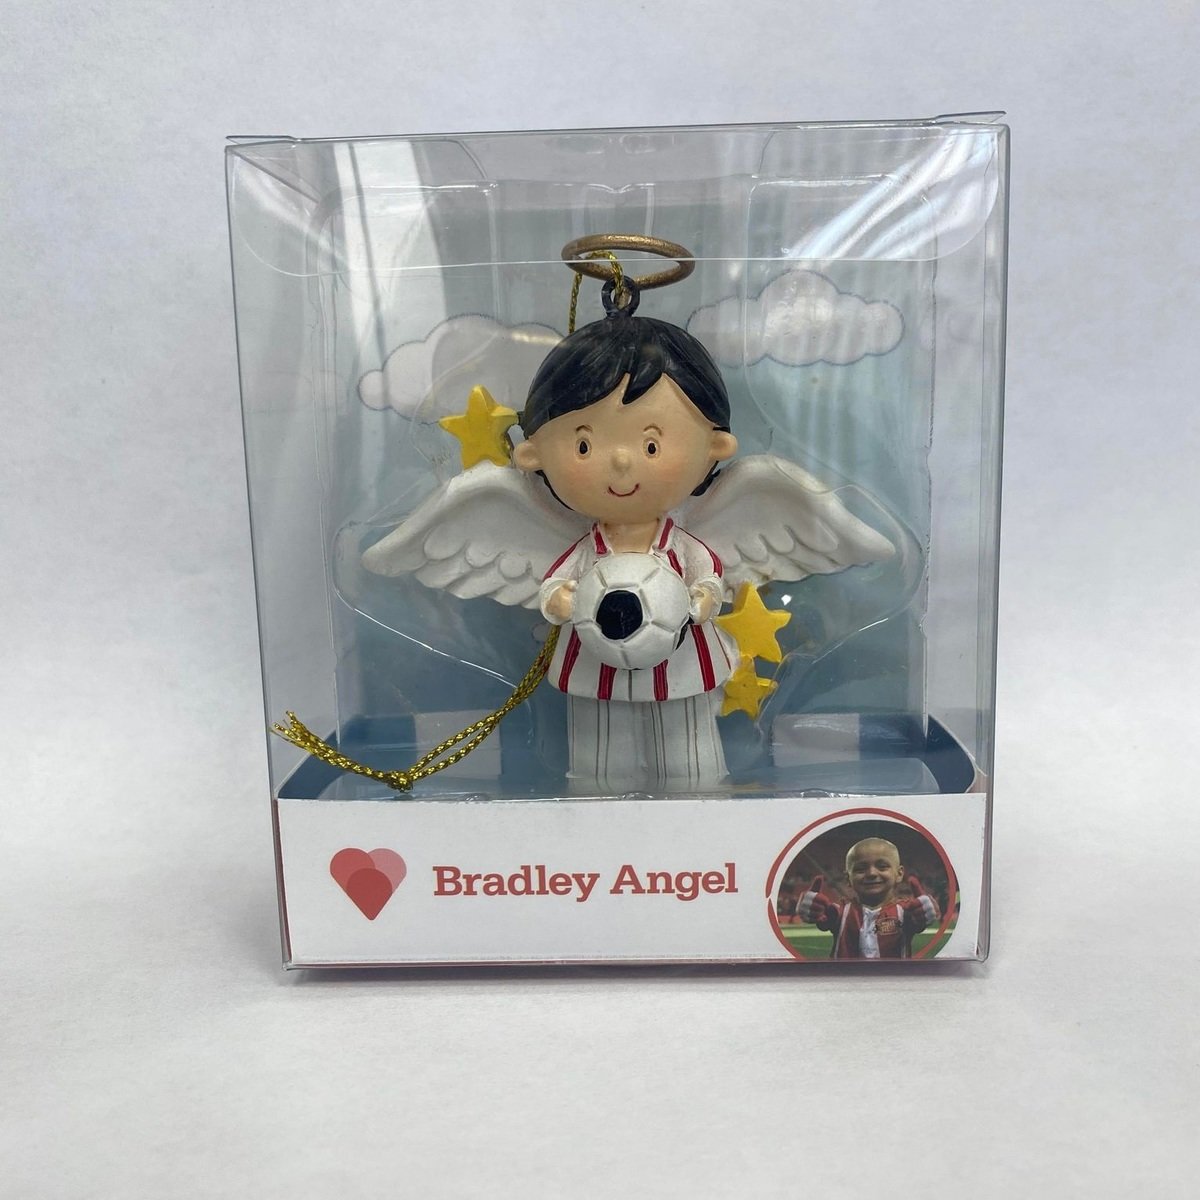 Buy the Bradley Angel Christmas Bauble(last one) online at Sunderland AFC Store